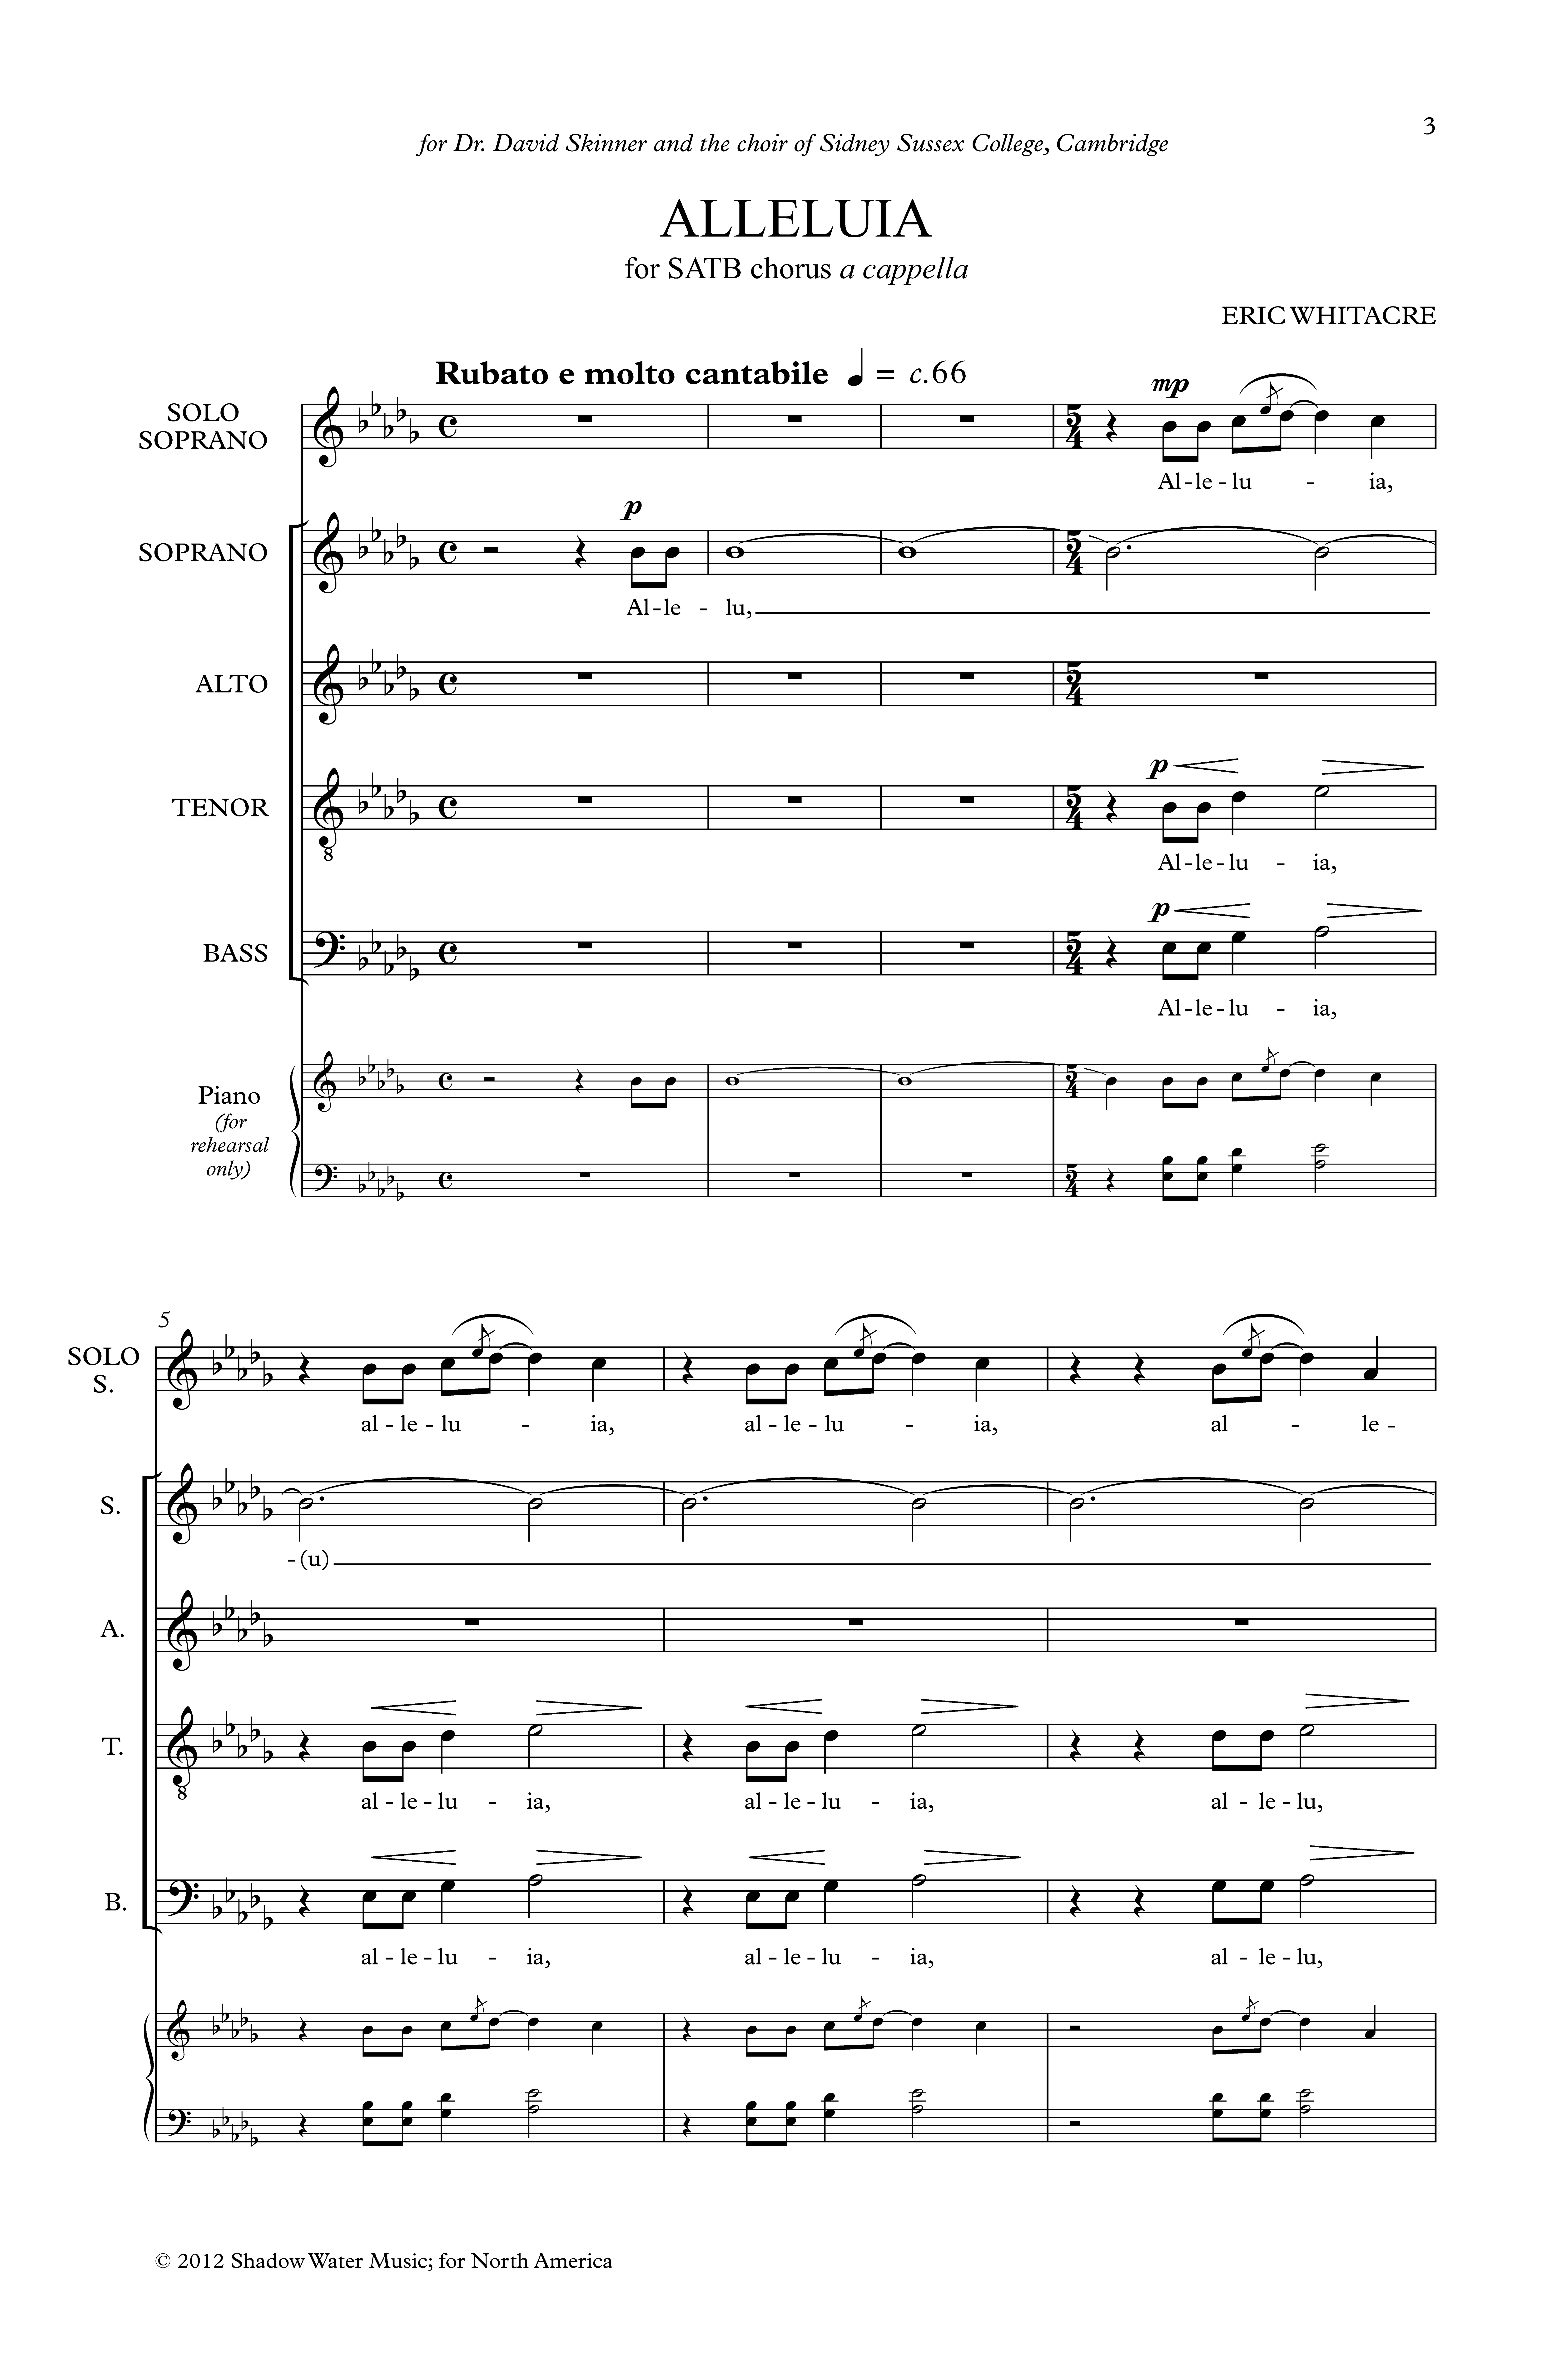 Download Eric Whitacre Alleluia Sheet Music